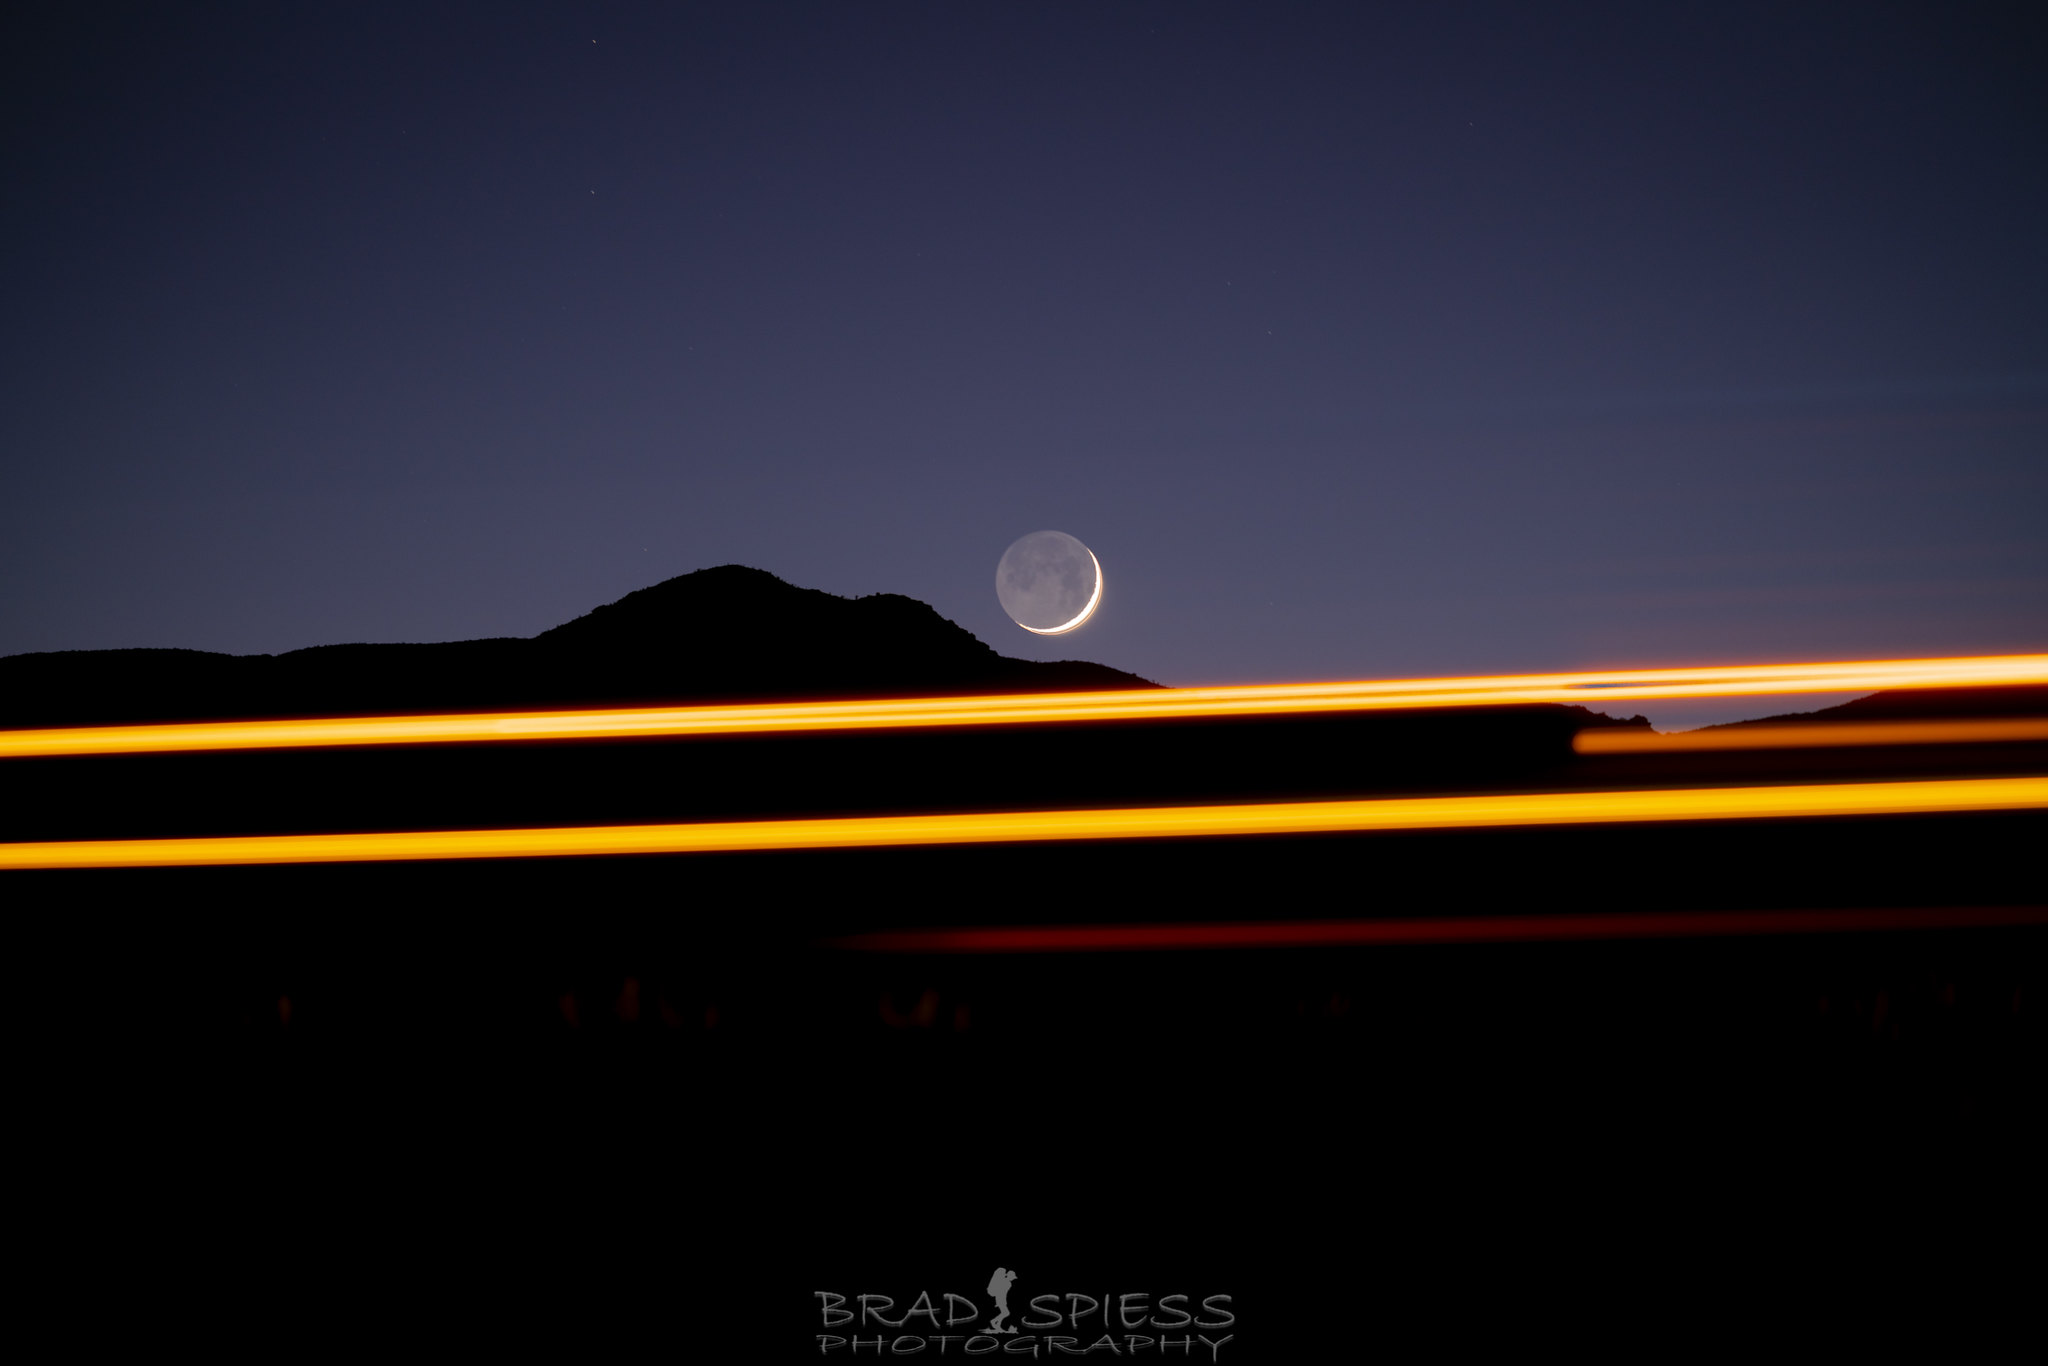 The descending crescent moon about to descend behind a mountain with the light trails from passing cars in the foreground.